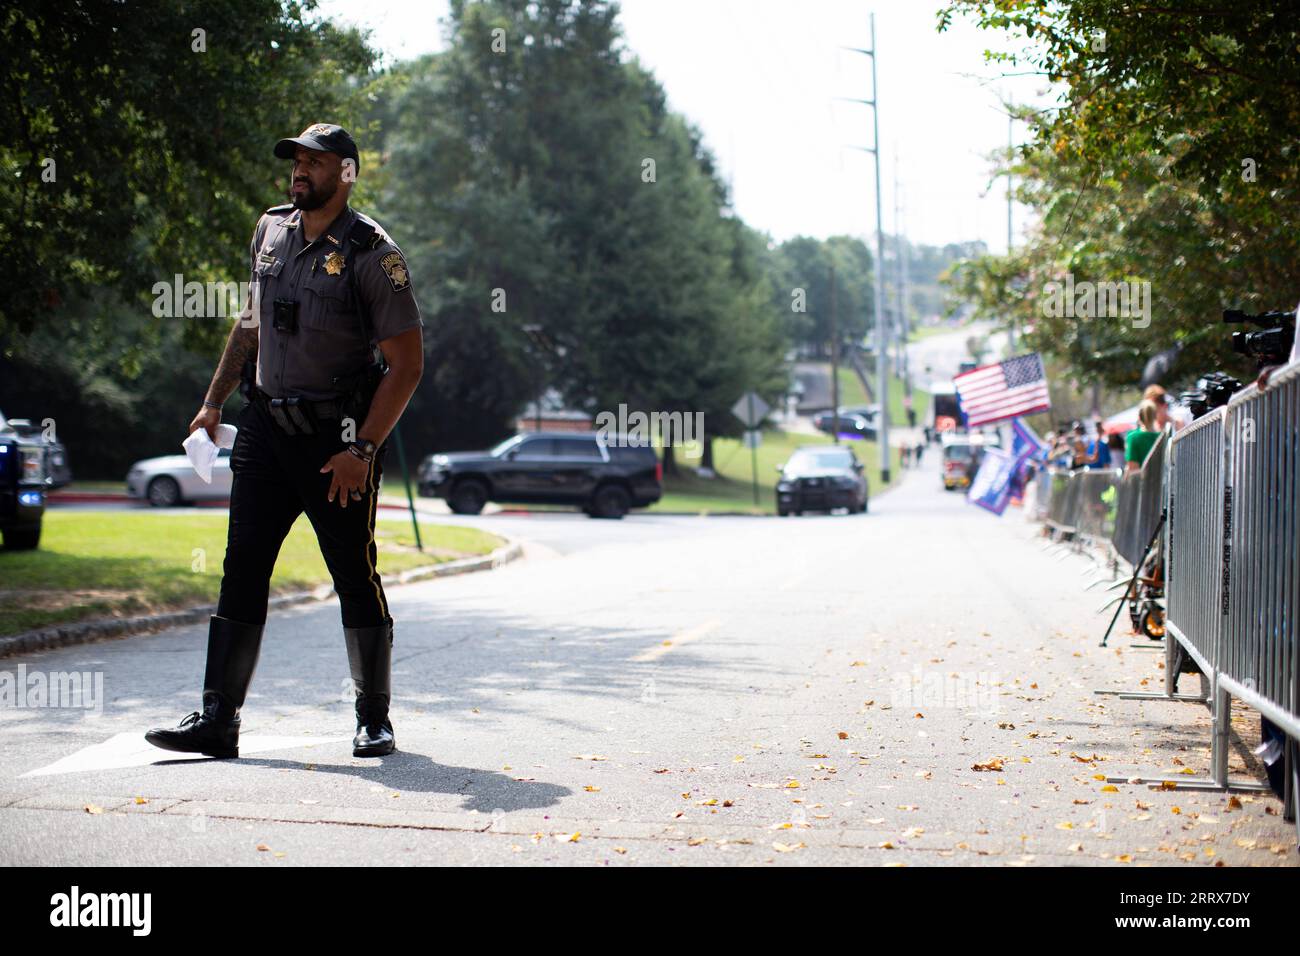 230825 -- ATLANTA, Aug. 25, 2023 -- A police officer is seen outside the Fulton County Jail in Atlanta, Georgia, the United States, Aug. 24, 2023. Former U.S. President Donald Trump turned himself in on Thursday to the authorities in Atlanta for the Georgia election interference case. Photo by /Xinhua U.S.-FORMER PRESIDENT-SURRENDER-GEORGIA ELECTION INTERFERENCE MatthewxPendry PUBLICATIONxNOTxINxCHN Stock Photo